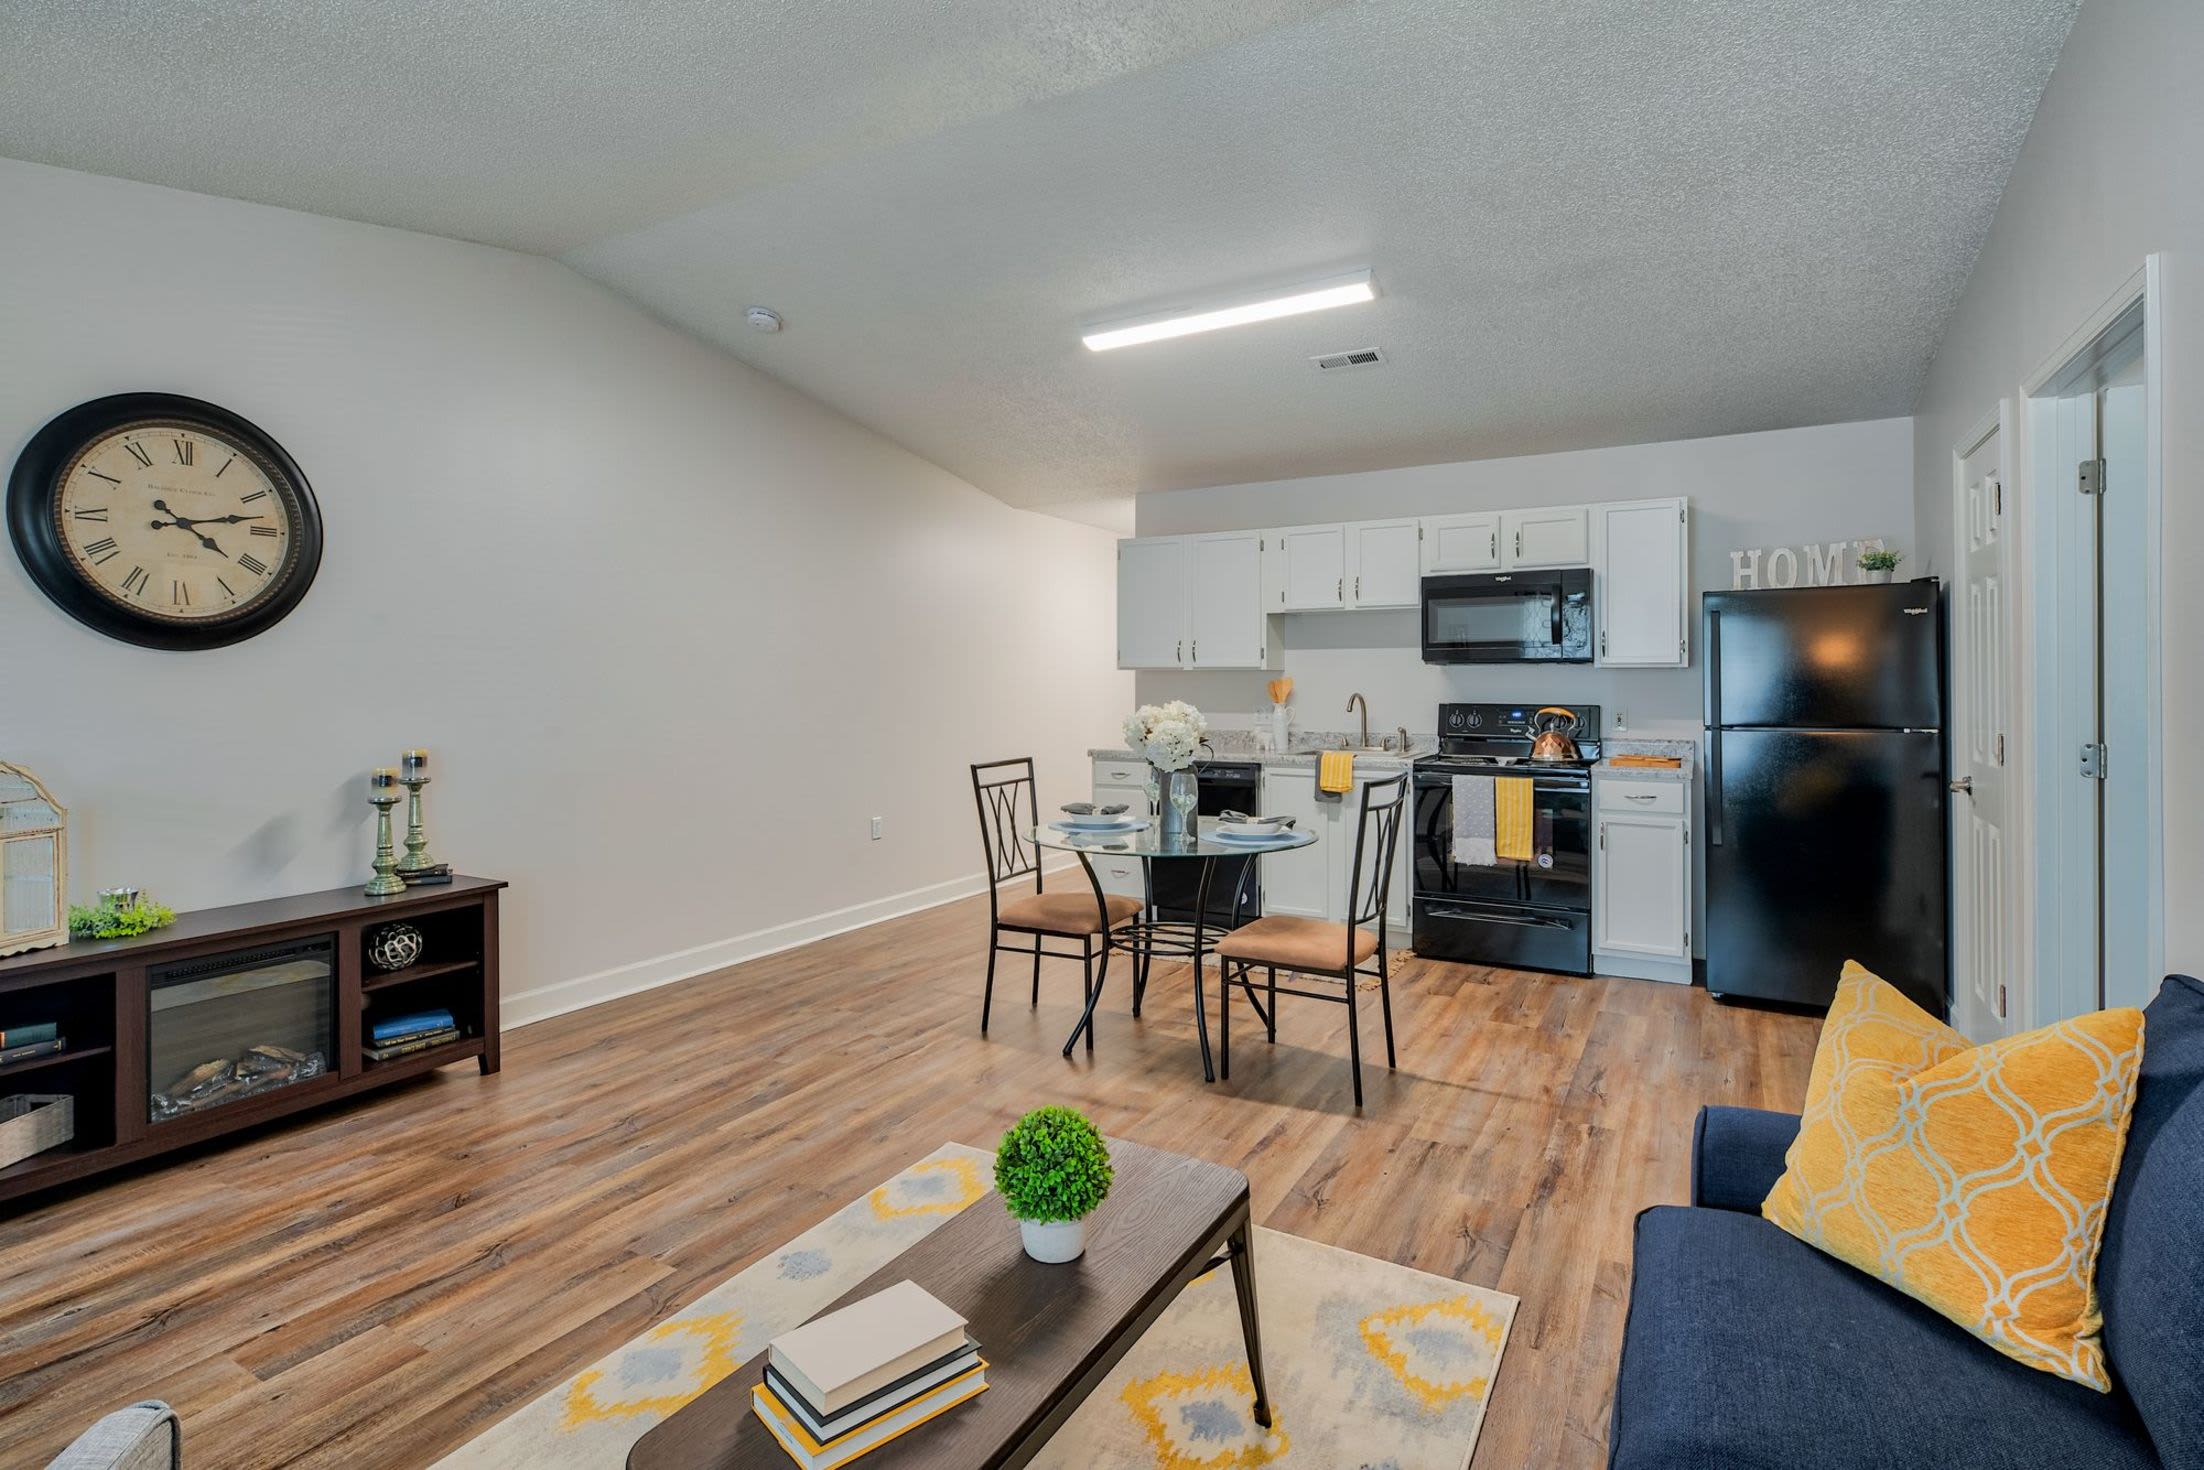 Spacious apartment with wood-style flooring at Leisure Living in Evansville, Indiana